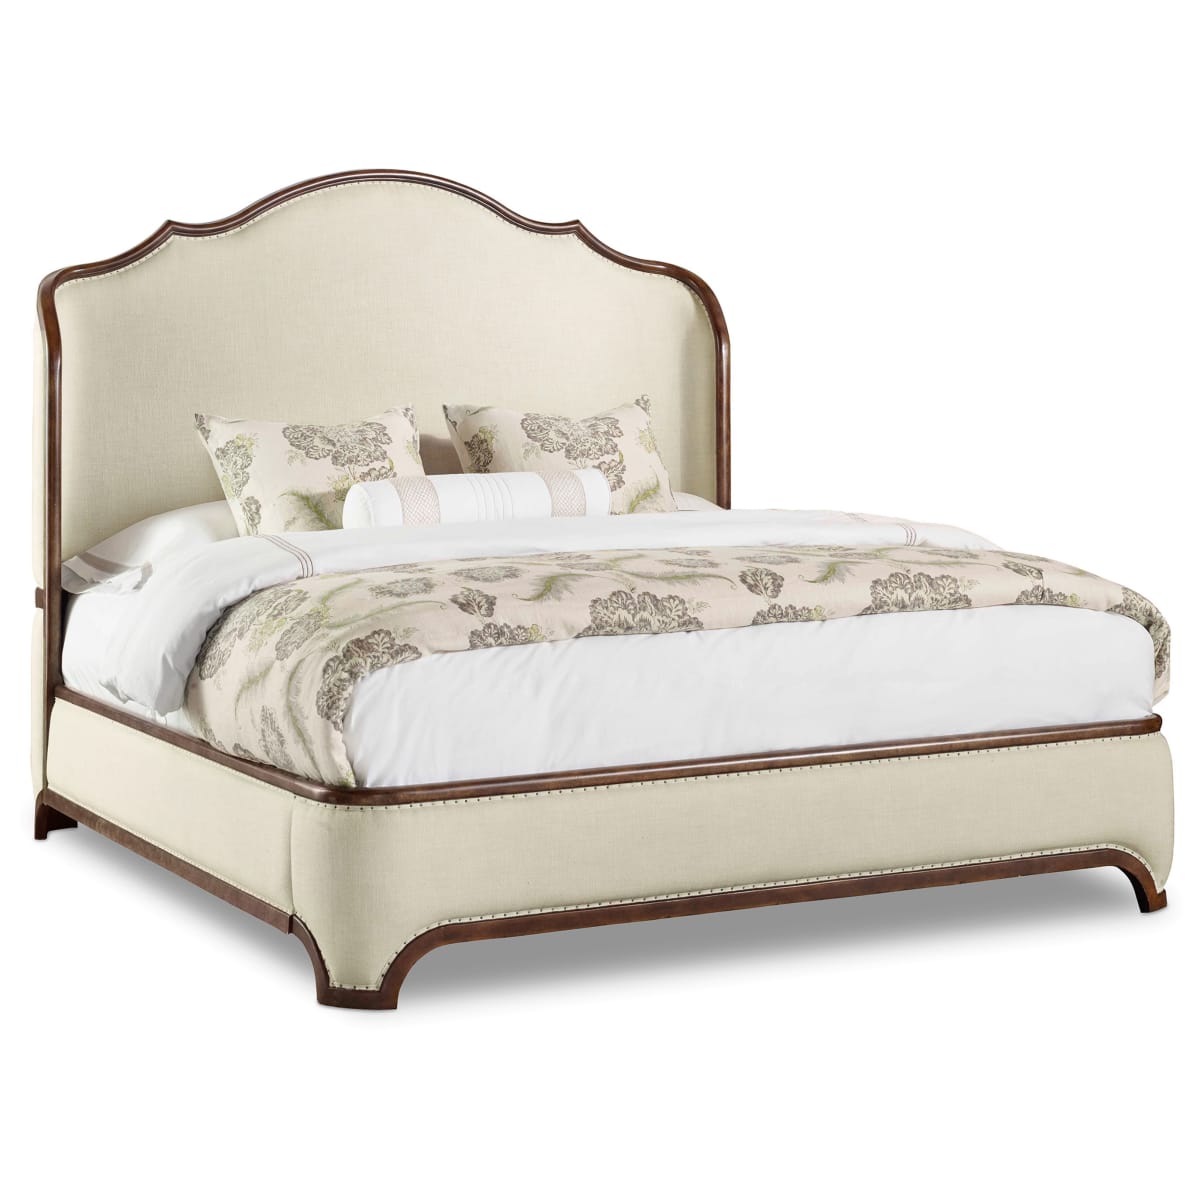 Furniture 5447 90866 Archivist, King Size Country Bed Frame